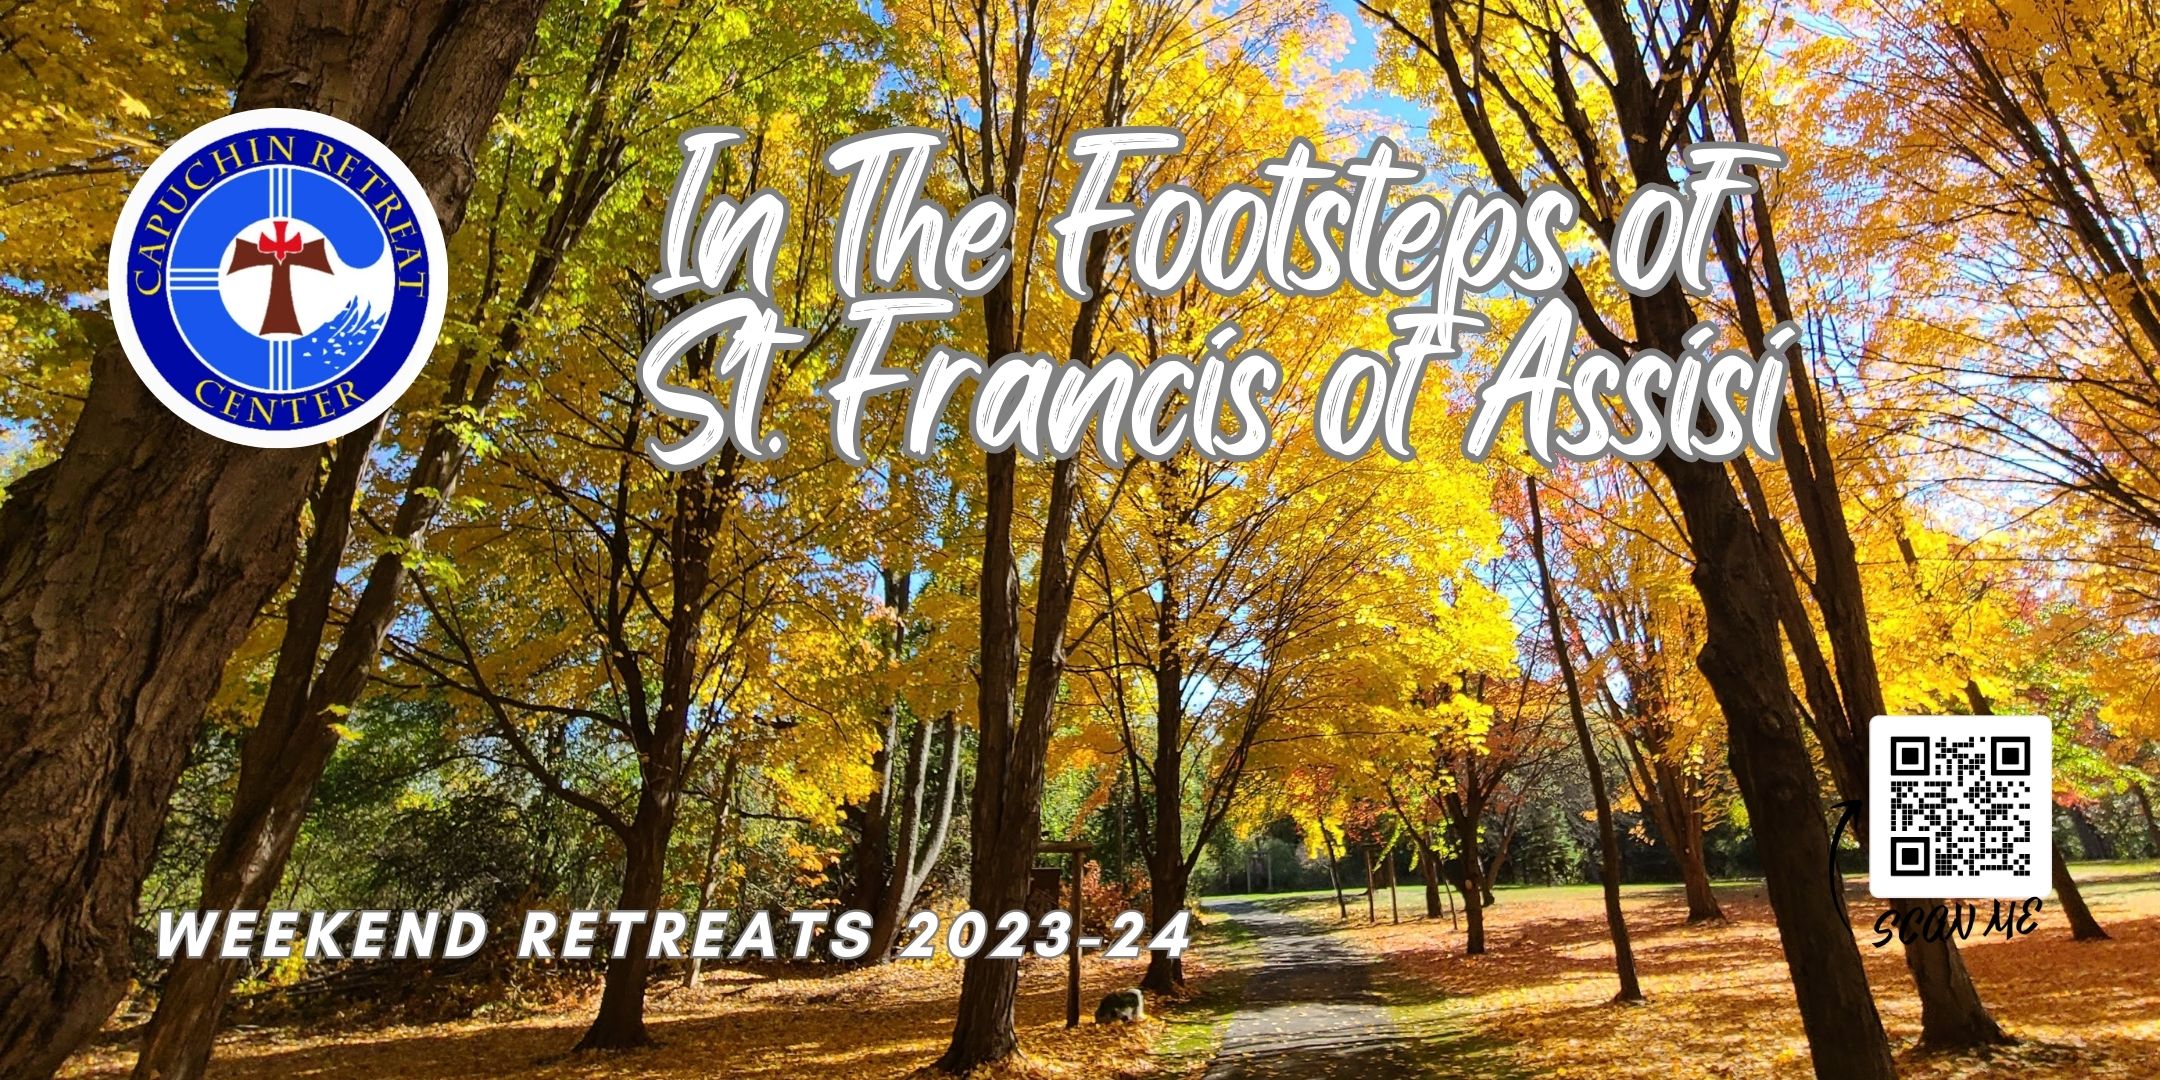 Midweek Mixed Retreat: “In the Footsteps of St. Francis of Assisi”